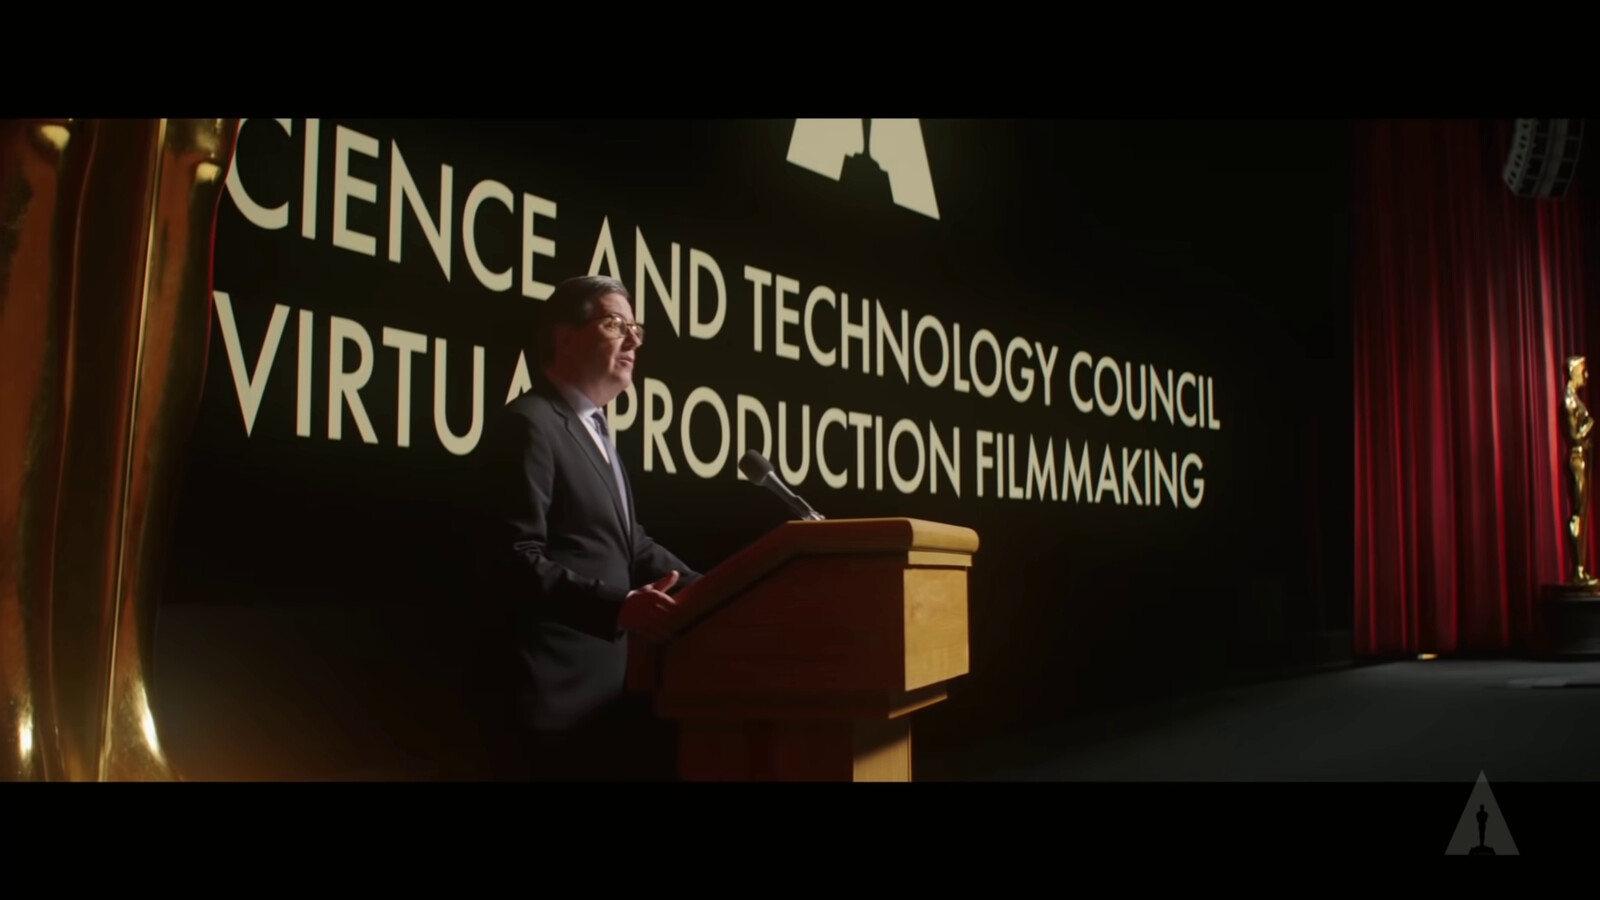 Oscars - Virtual Production - Academy's Science and Technology Council